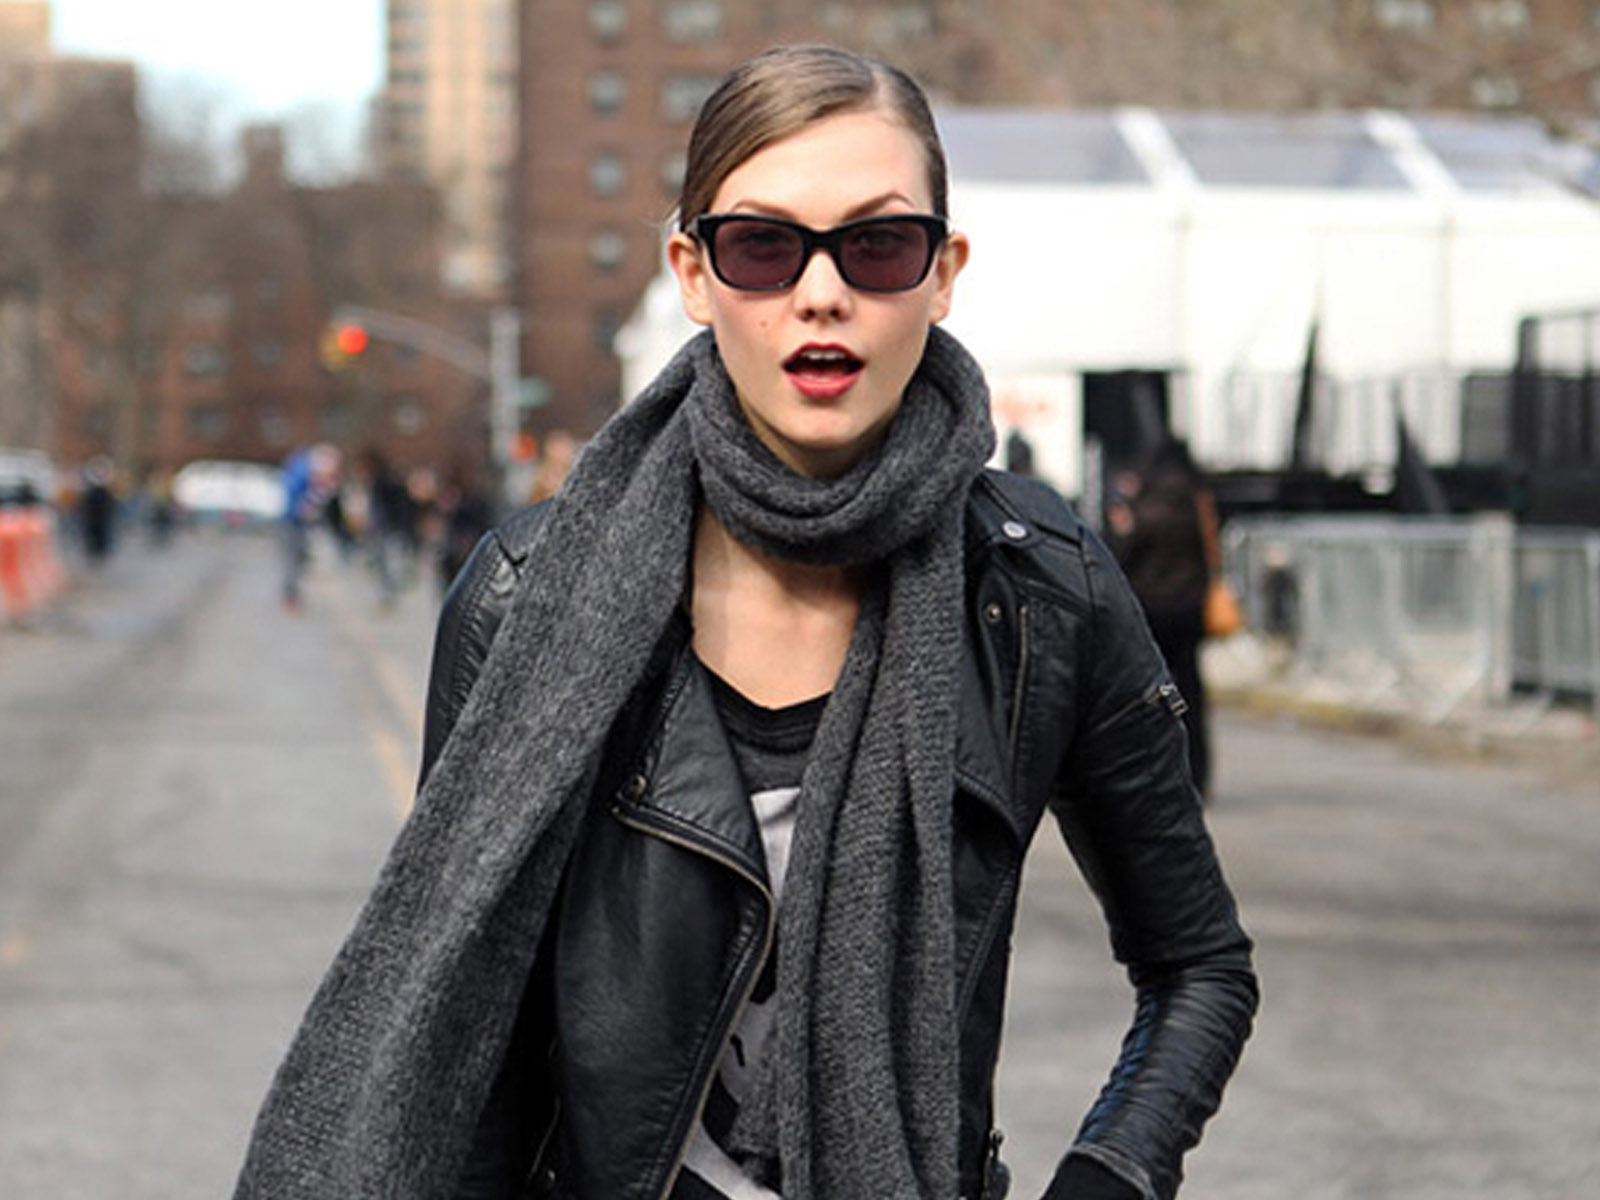 Put Together an All-Black Outfit and We’ll Reveal How Dark Your Soul Is Wool scarf